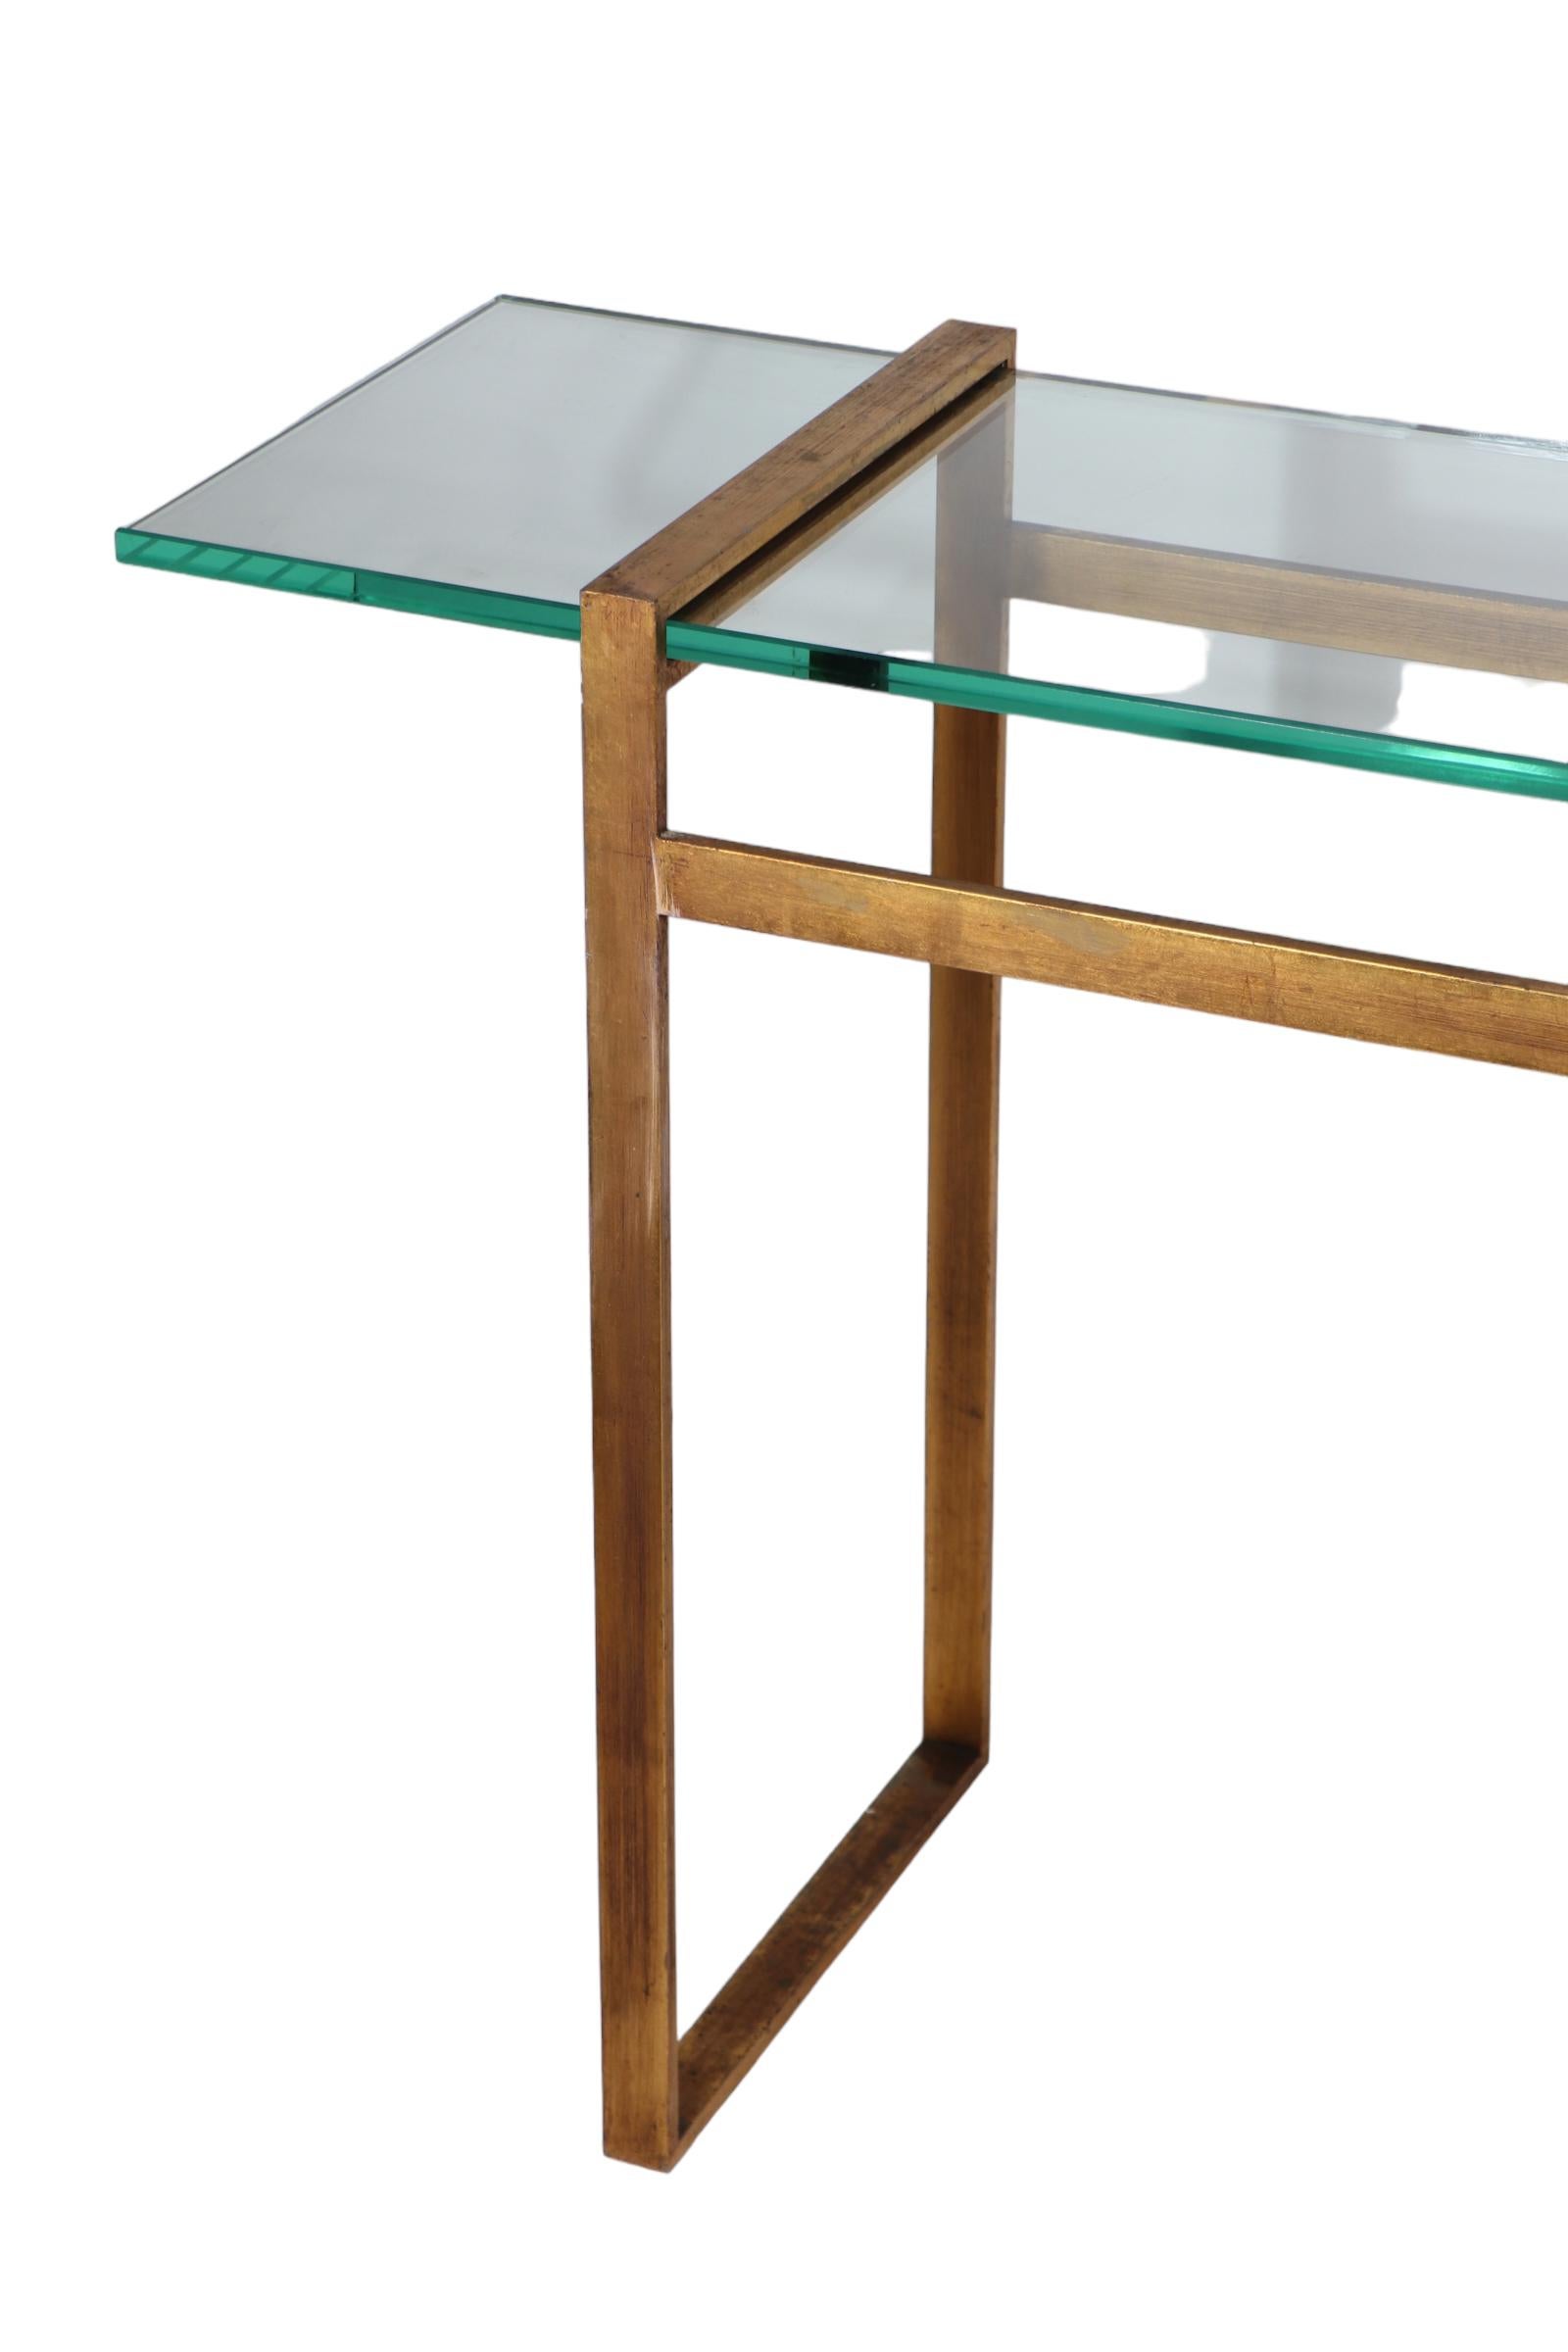 Large Modernist Metal and Glass Console in Faux Gilt Finish c 1970’s For Sale 6